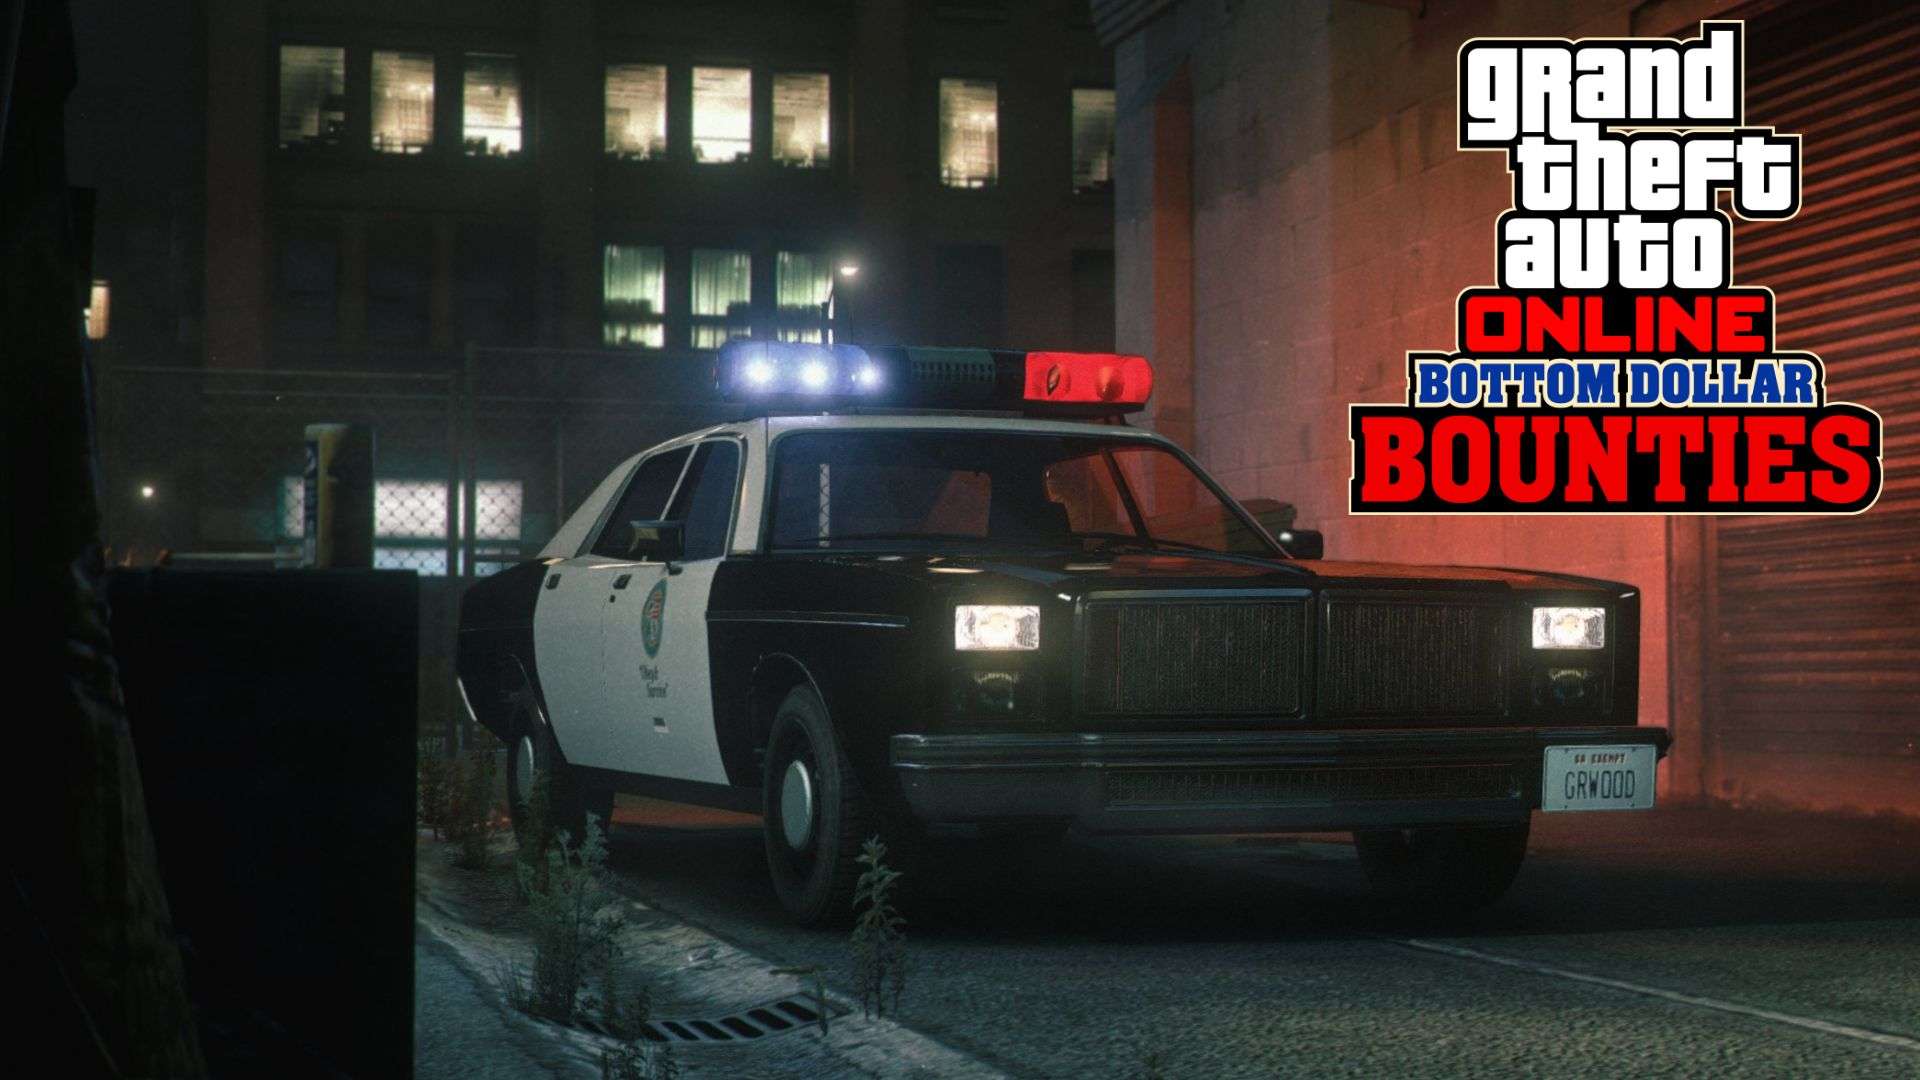 Police car parked in alley in GTA Online with Bottom Dollar Bounties logo